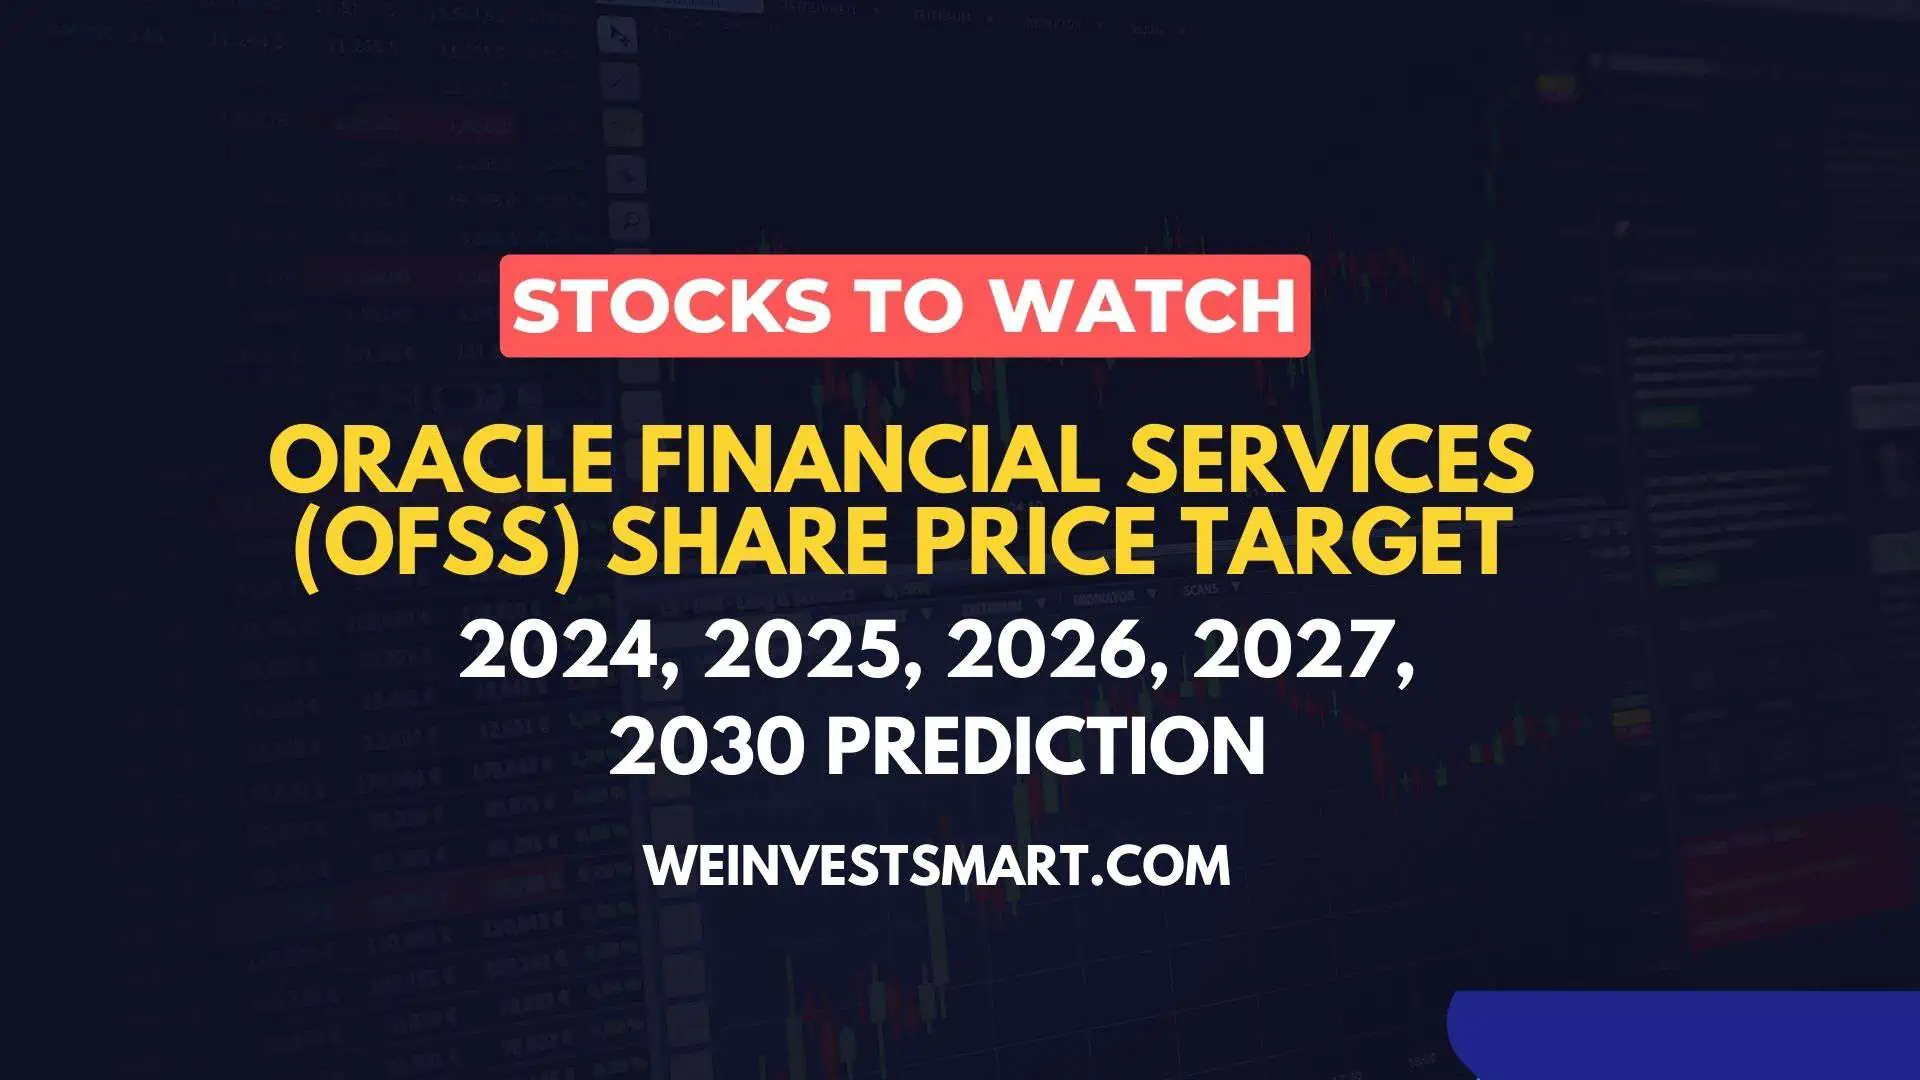 Oracle Financial Services (OFSS) share price target 2024, 2025, 2026, 2030 prediction